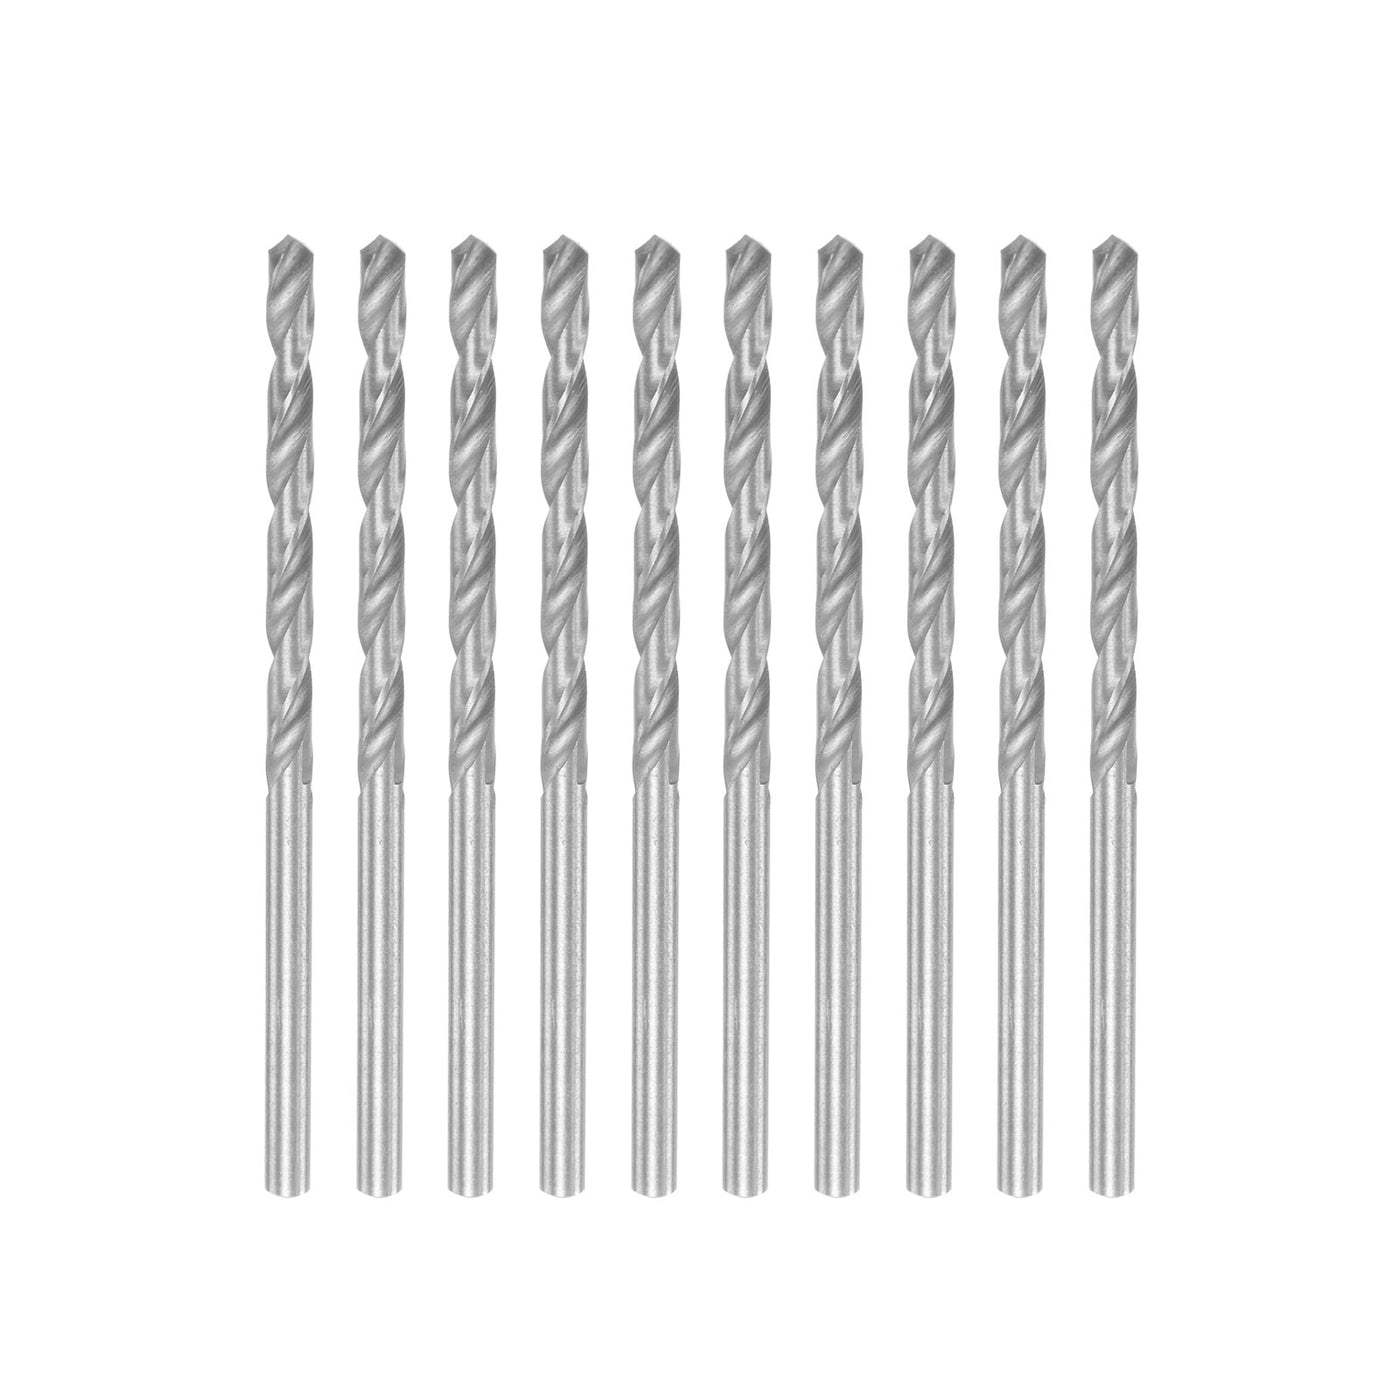 uxcell Uxcell 10 Pcs 3.1mm High Speed Steel Drill Bits, Fully Ground 65mm Length Drill Bit